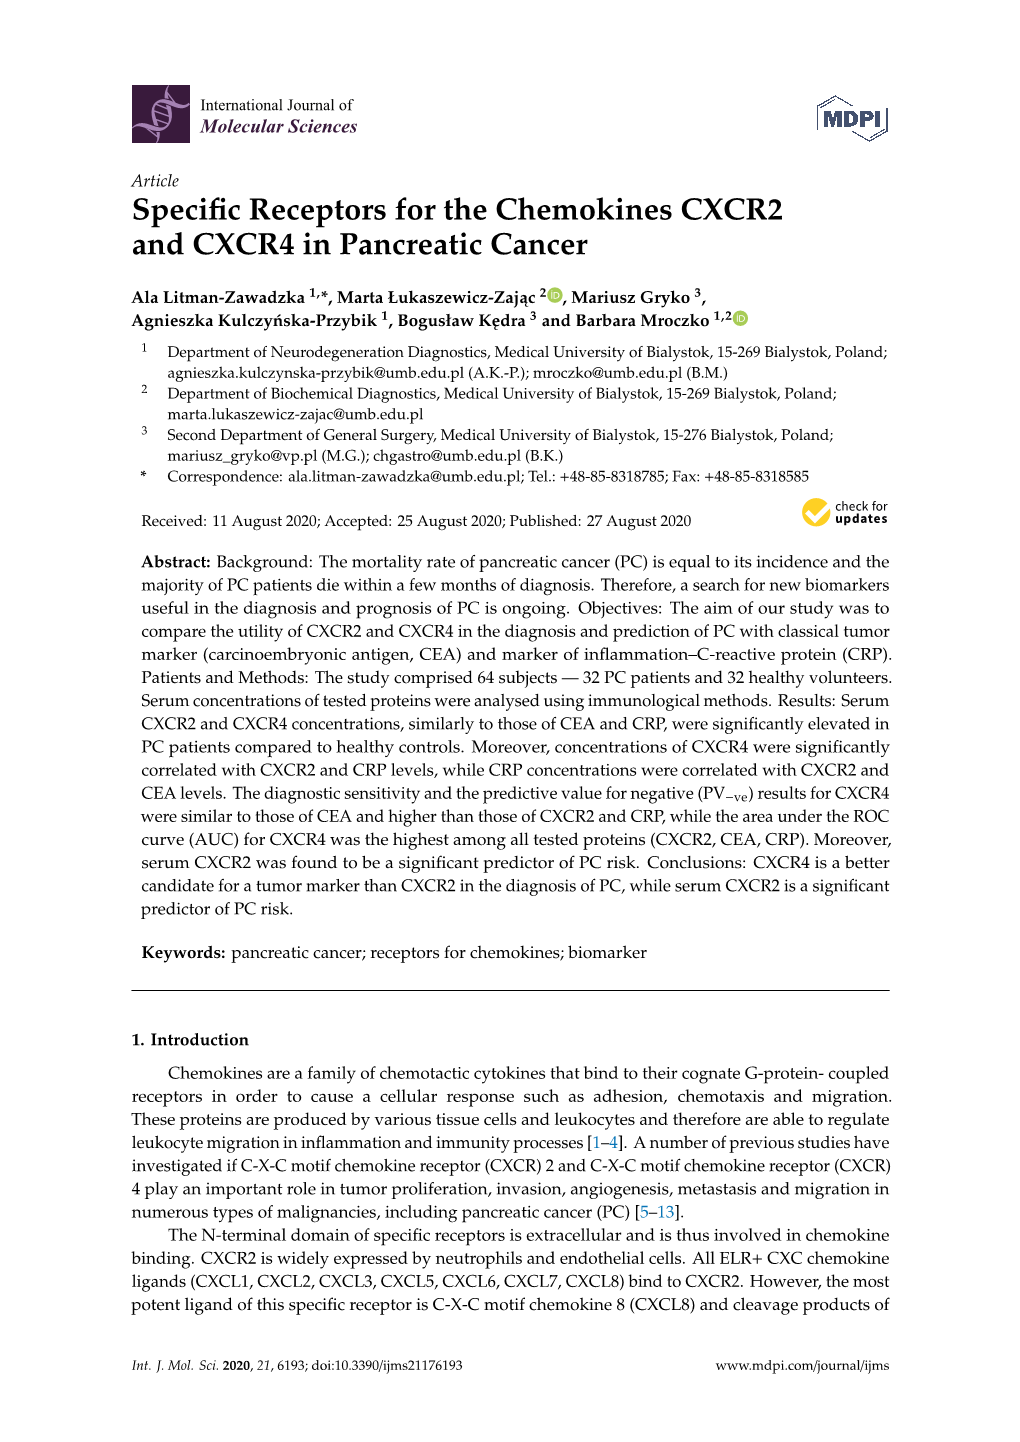 Specific Receptors for the Chemokines CXCR2 and CXCR4